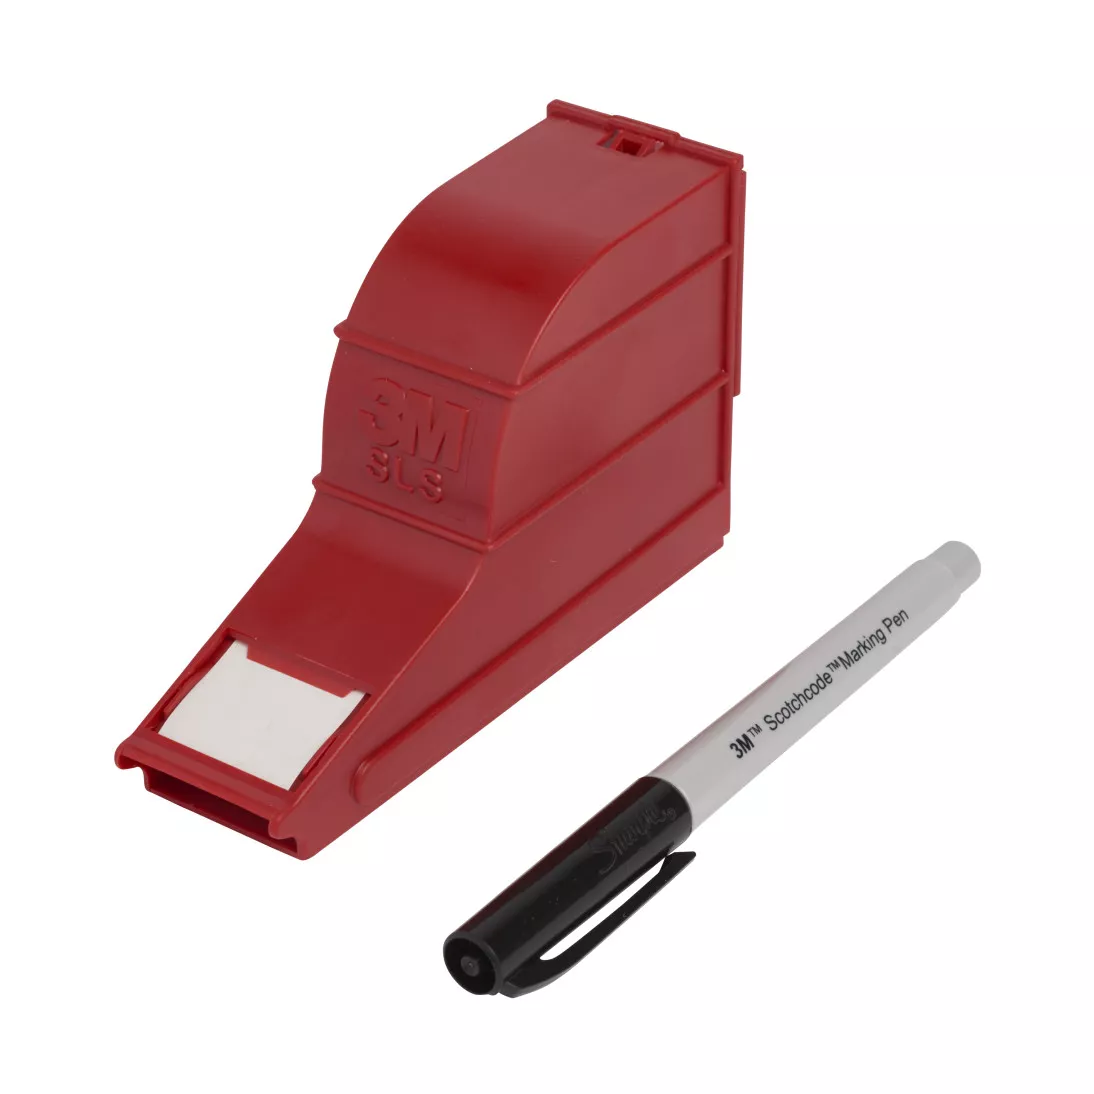 3M™ ScotchCode™ Wire Marker Write-On Dispenser with Tape and Pen SLS,
1.0 in x 2.125 in, 10/Case